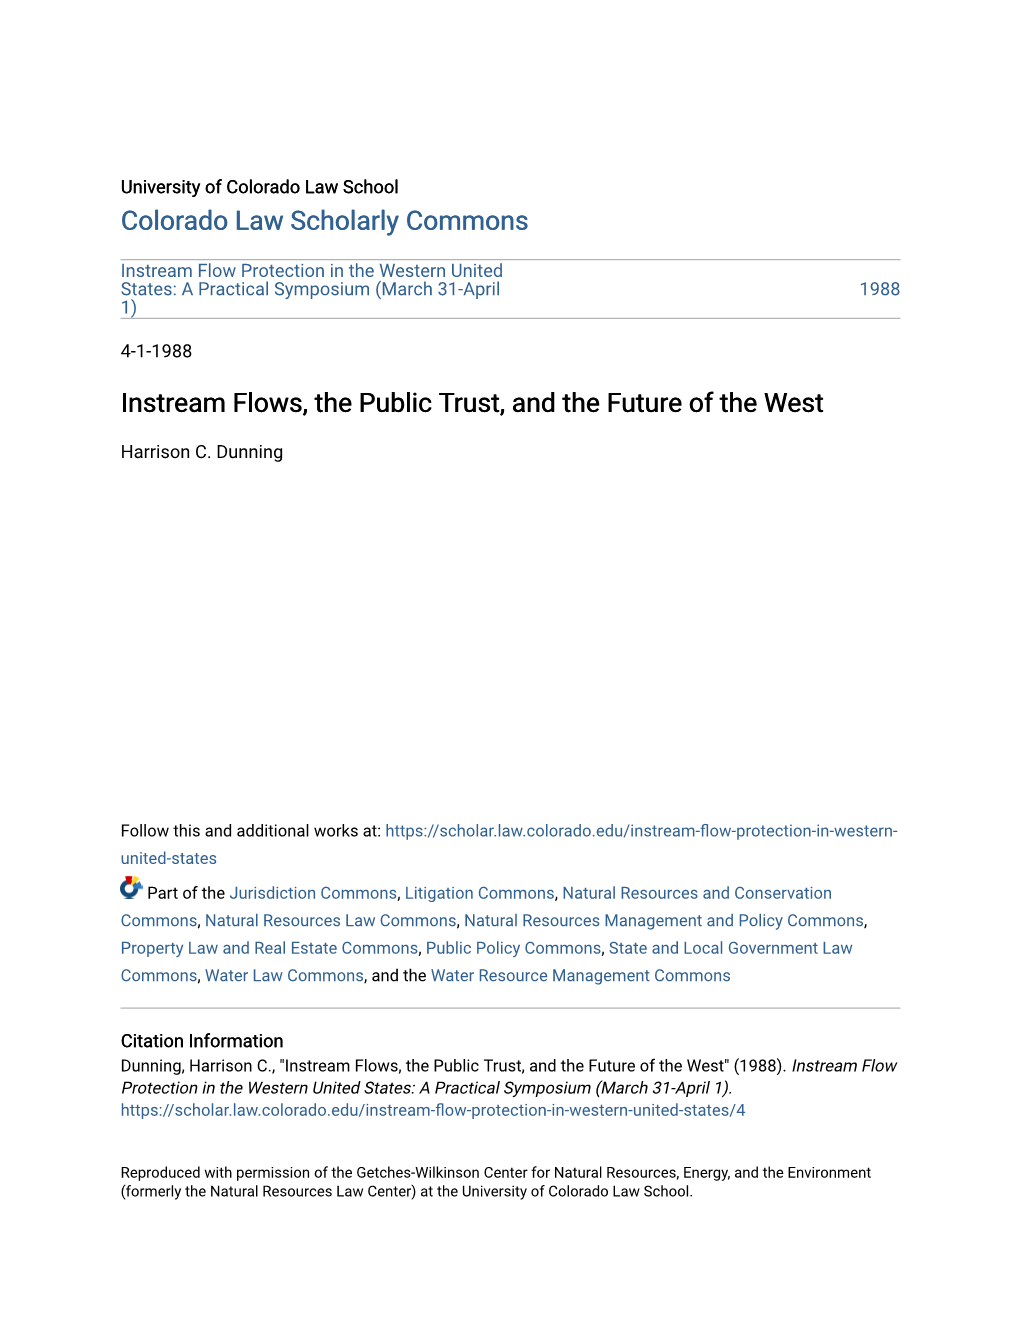 Instream Flows, the Public Trust, and the Future of the West